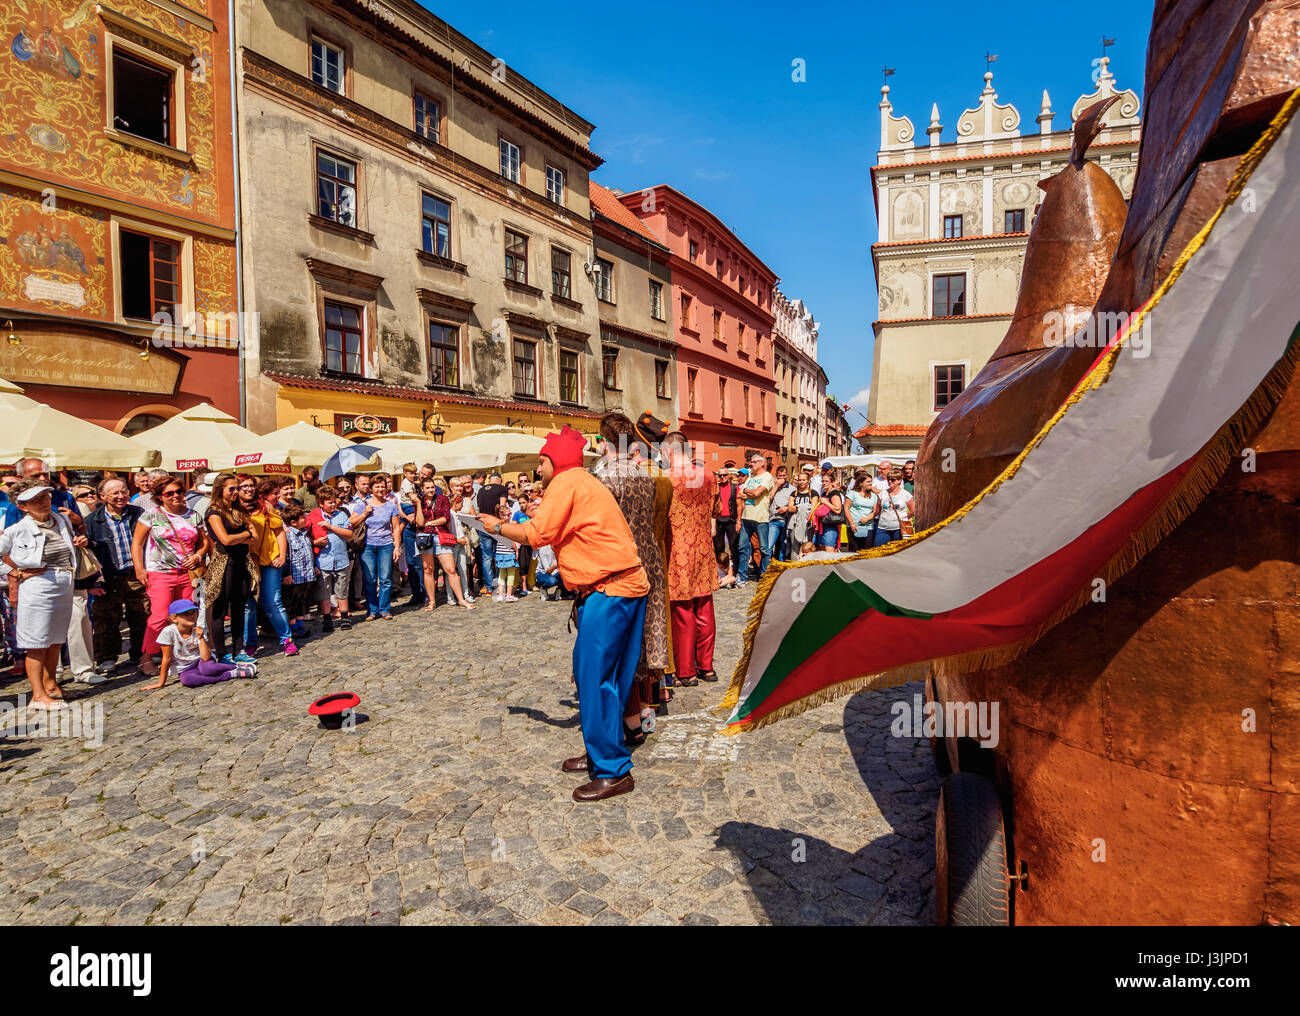 Poland, Lublin Voivodeship, City of Lublin, Old Town, Copper Hen during the Jagiellonian Fair Stock Photo